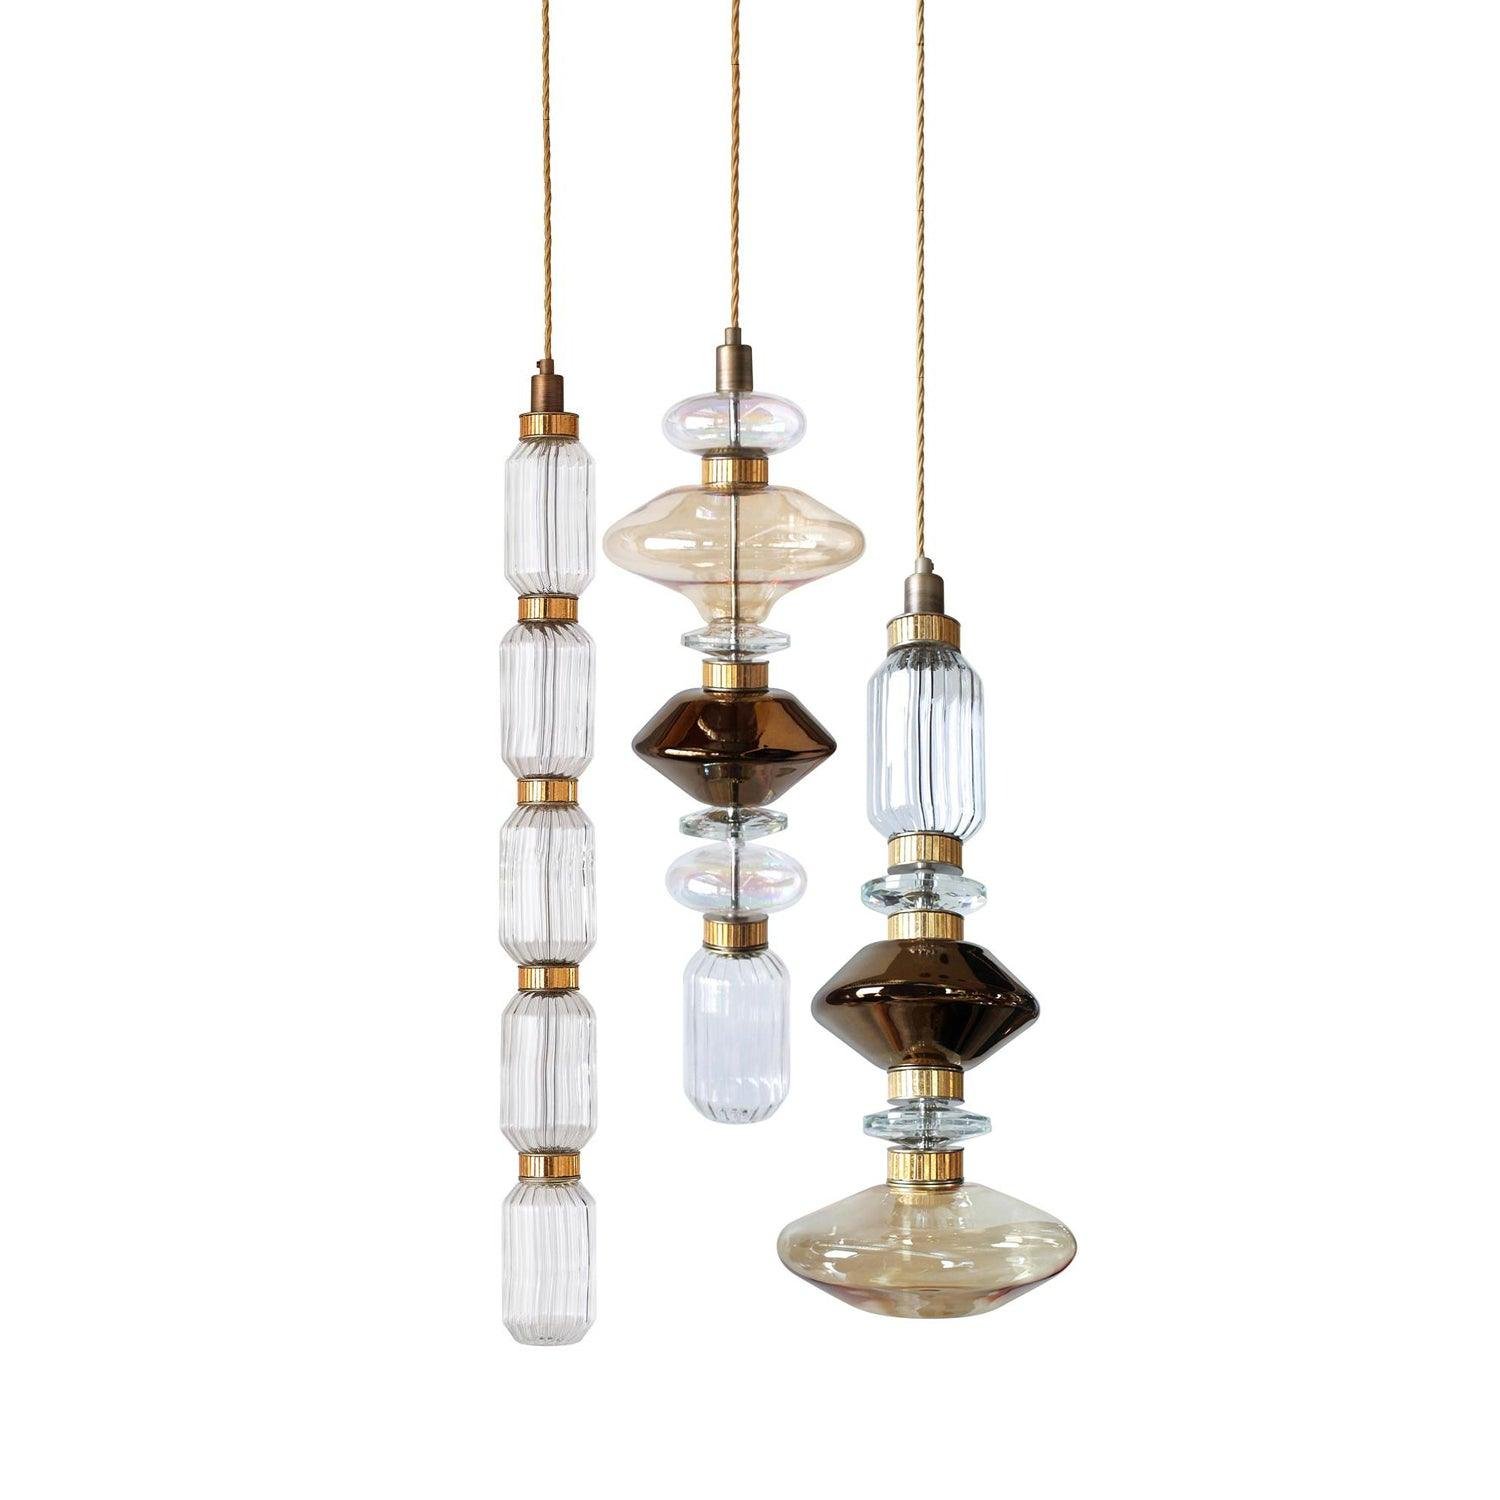 Ballet Pendant Lamp featuring 3 heads - Models E, F, and G, in Clear with Cool Light